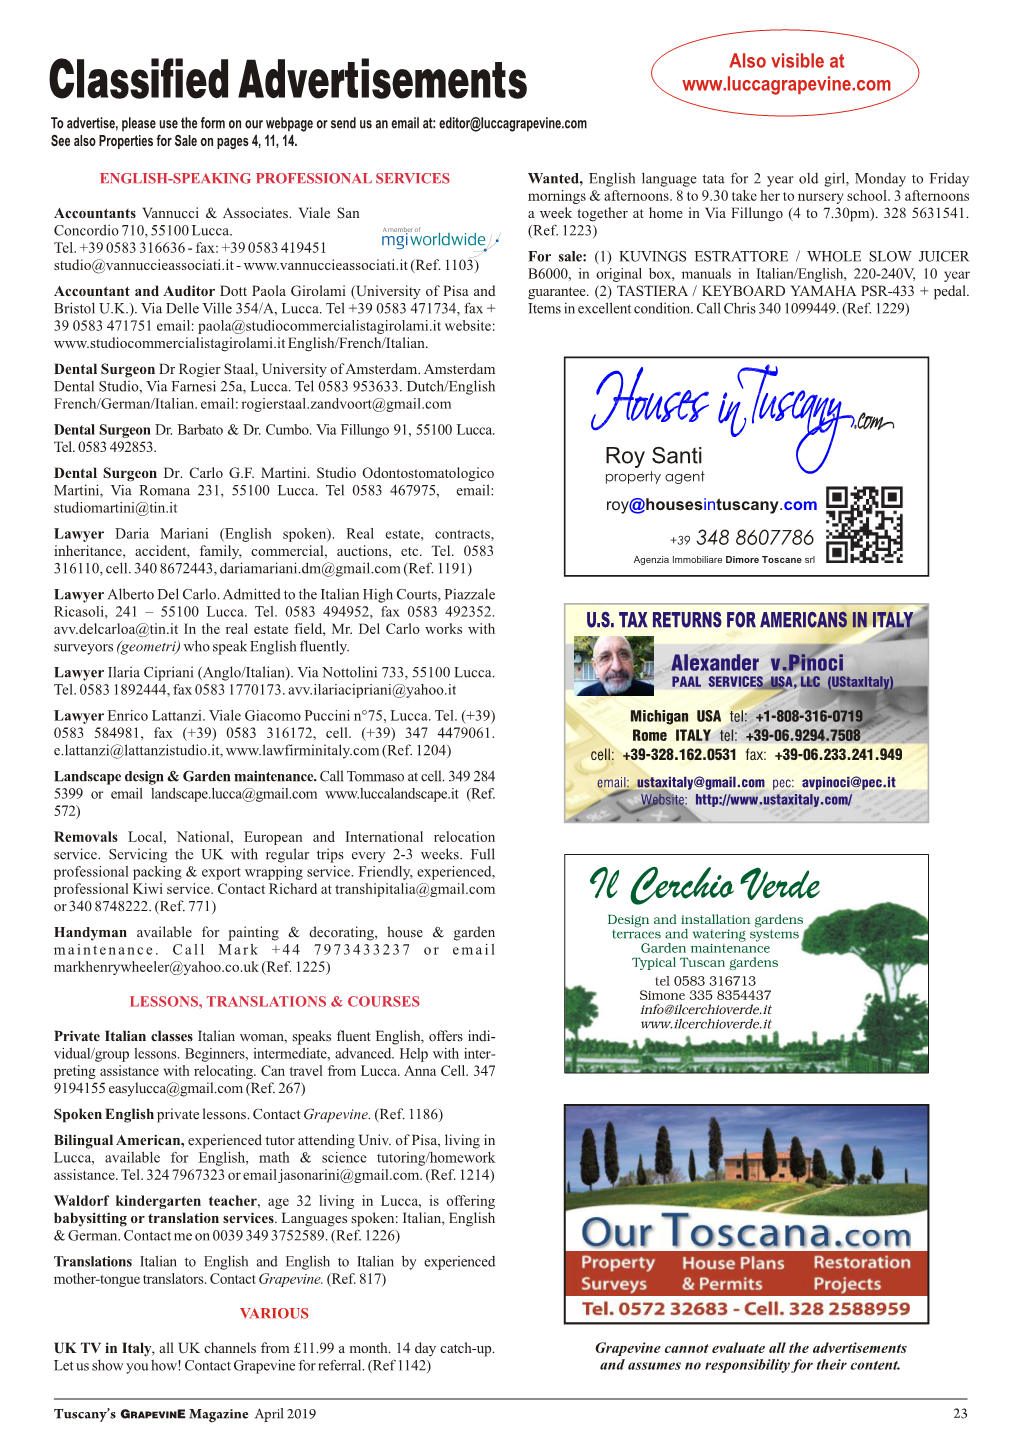 Classified Advertisements ~ April 2019 Issue